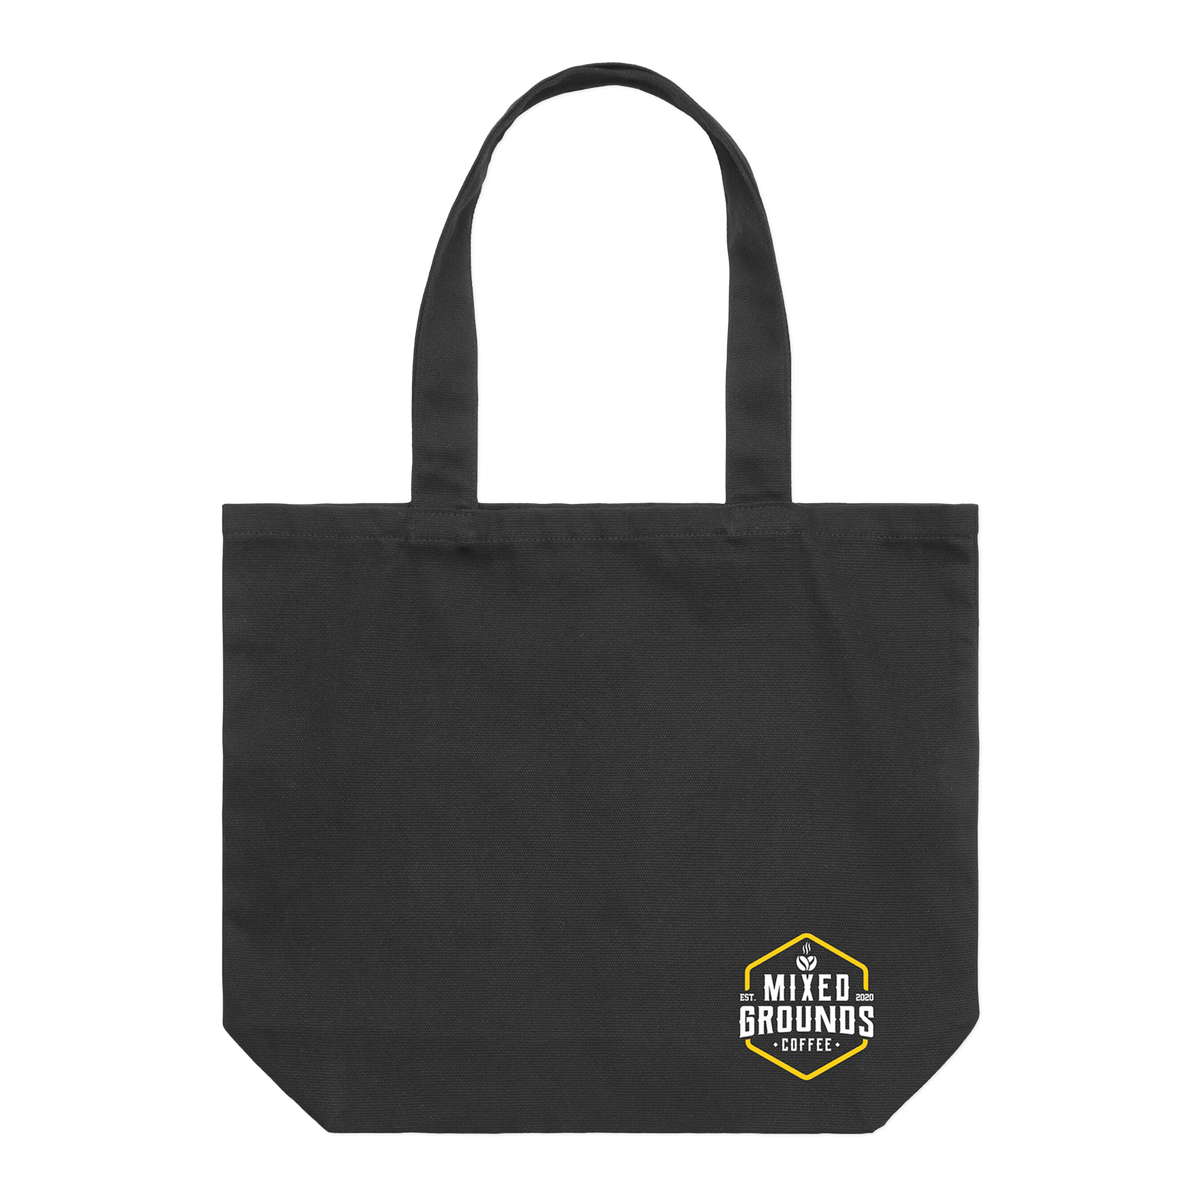 Mixed Grounds Shoulder Tote in black